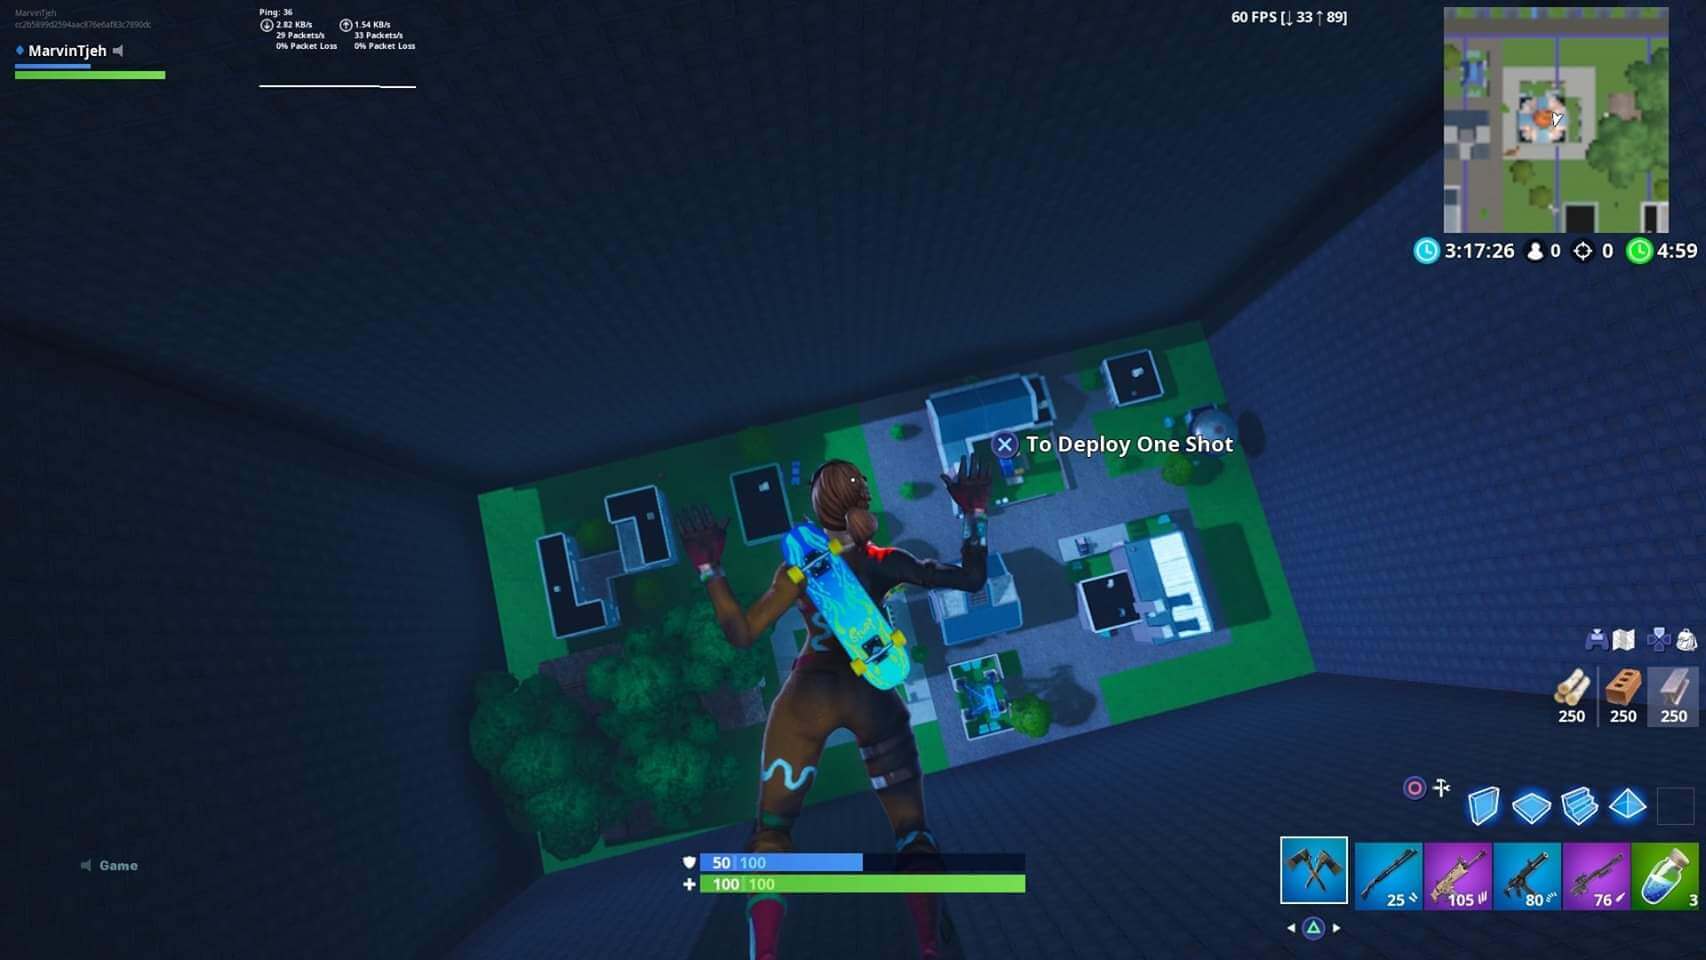 Touch Grass Simulator 1368-0928-3572 by bed - Fortnite Creative Map Code 